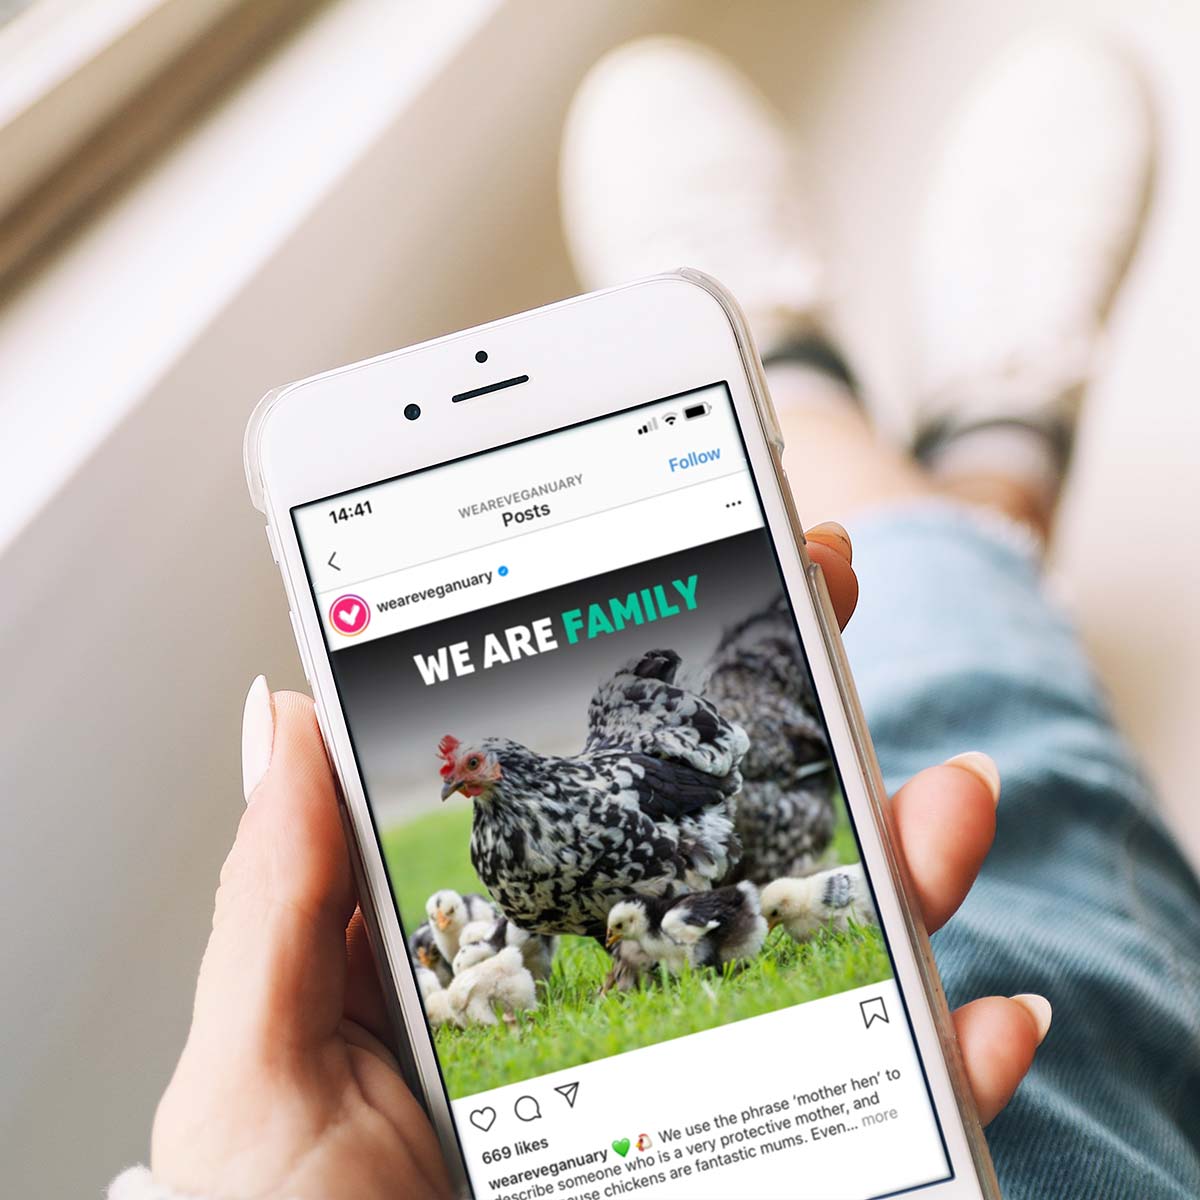 An unidentified person holding an iPhone displaying the Veganuary Instagram page